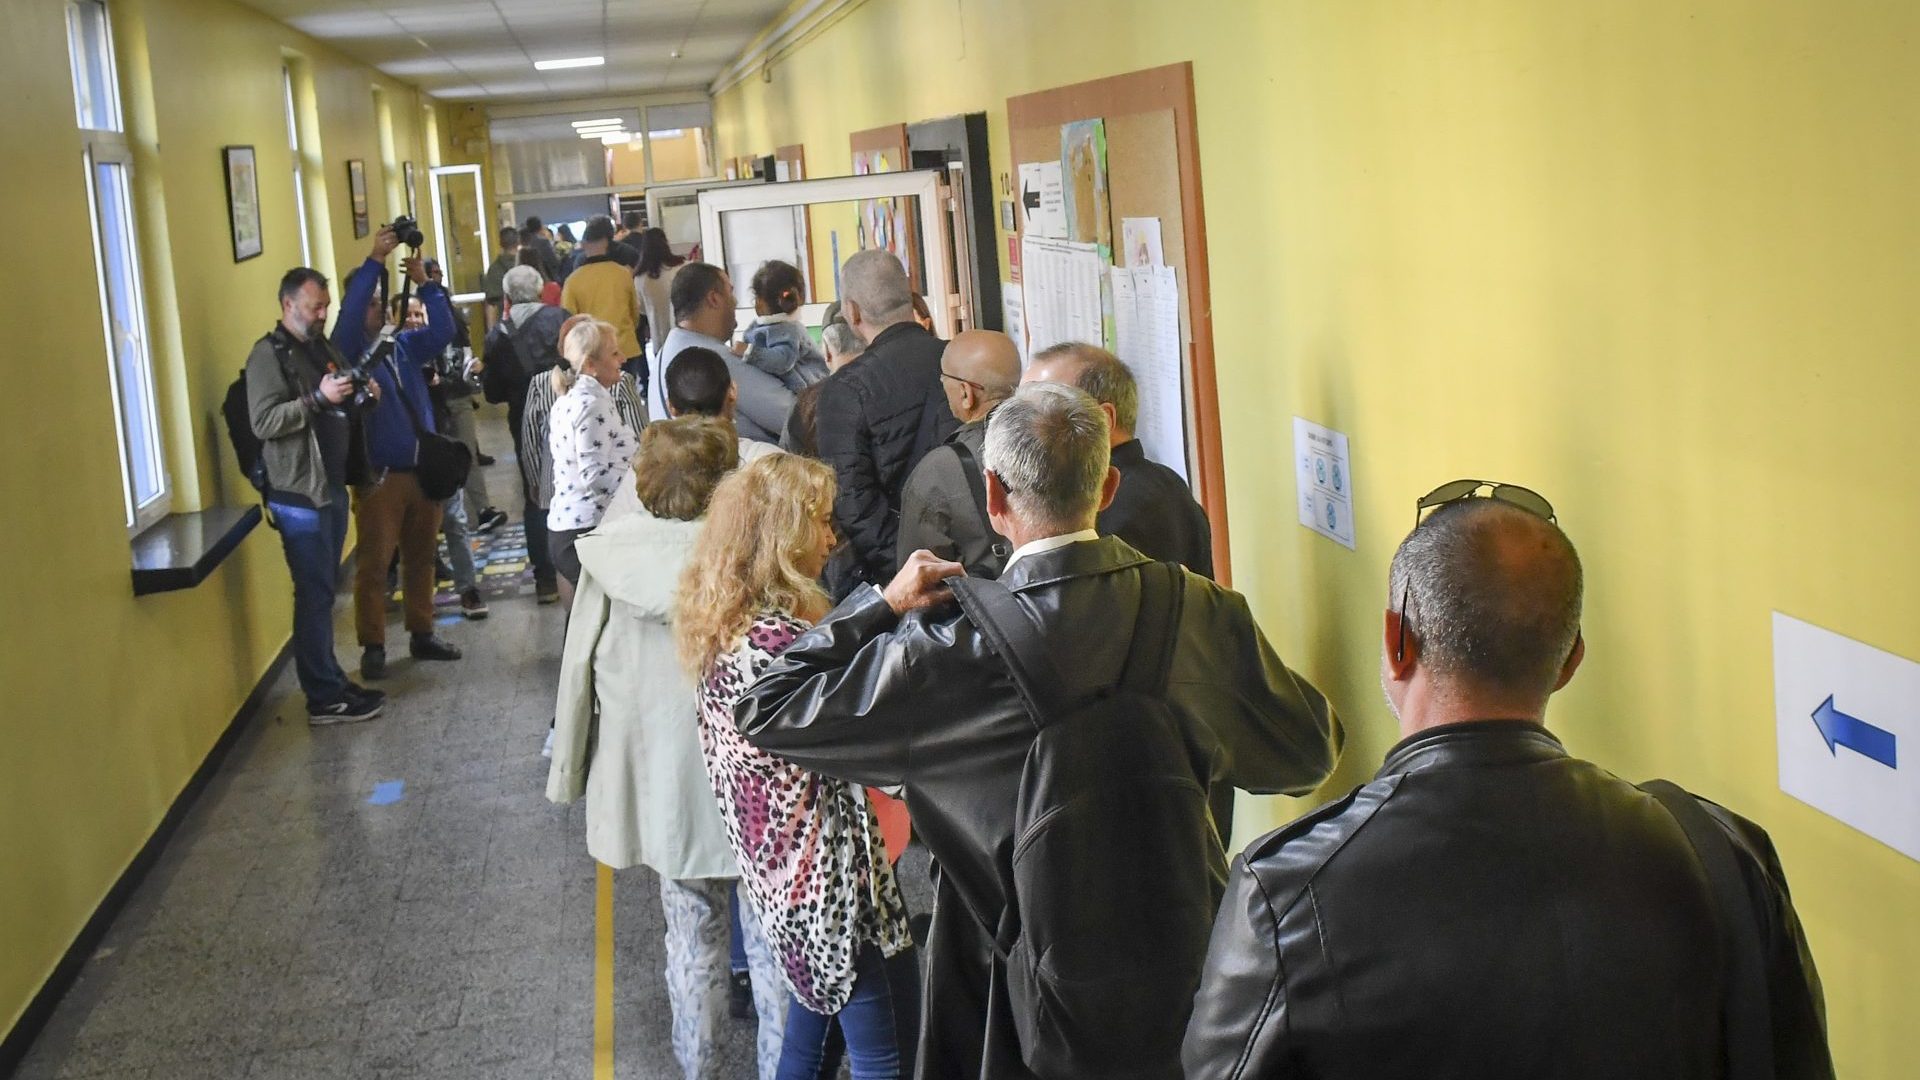 People wait on line in front of polling station during local government elections in Sofia. Photo:  Georgi Paleykov/NurPhoto via Getty Images